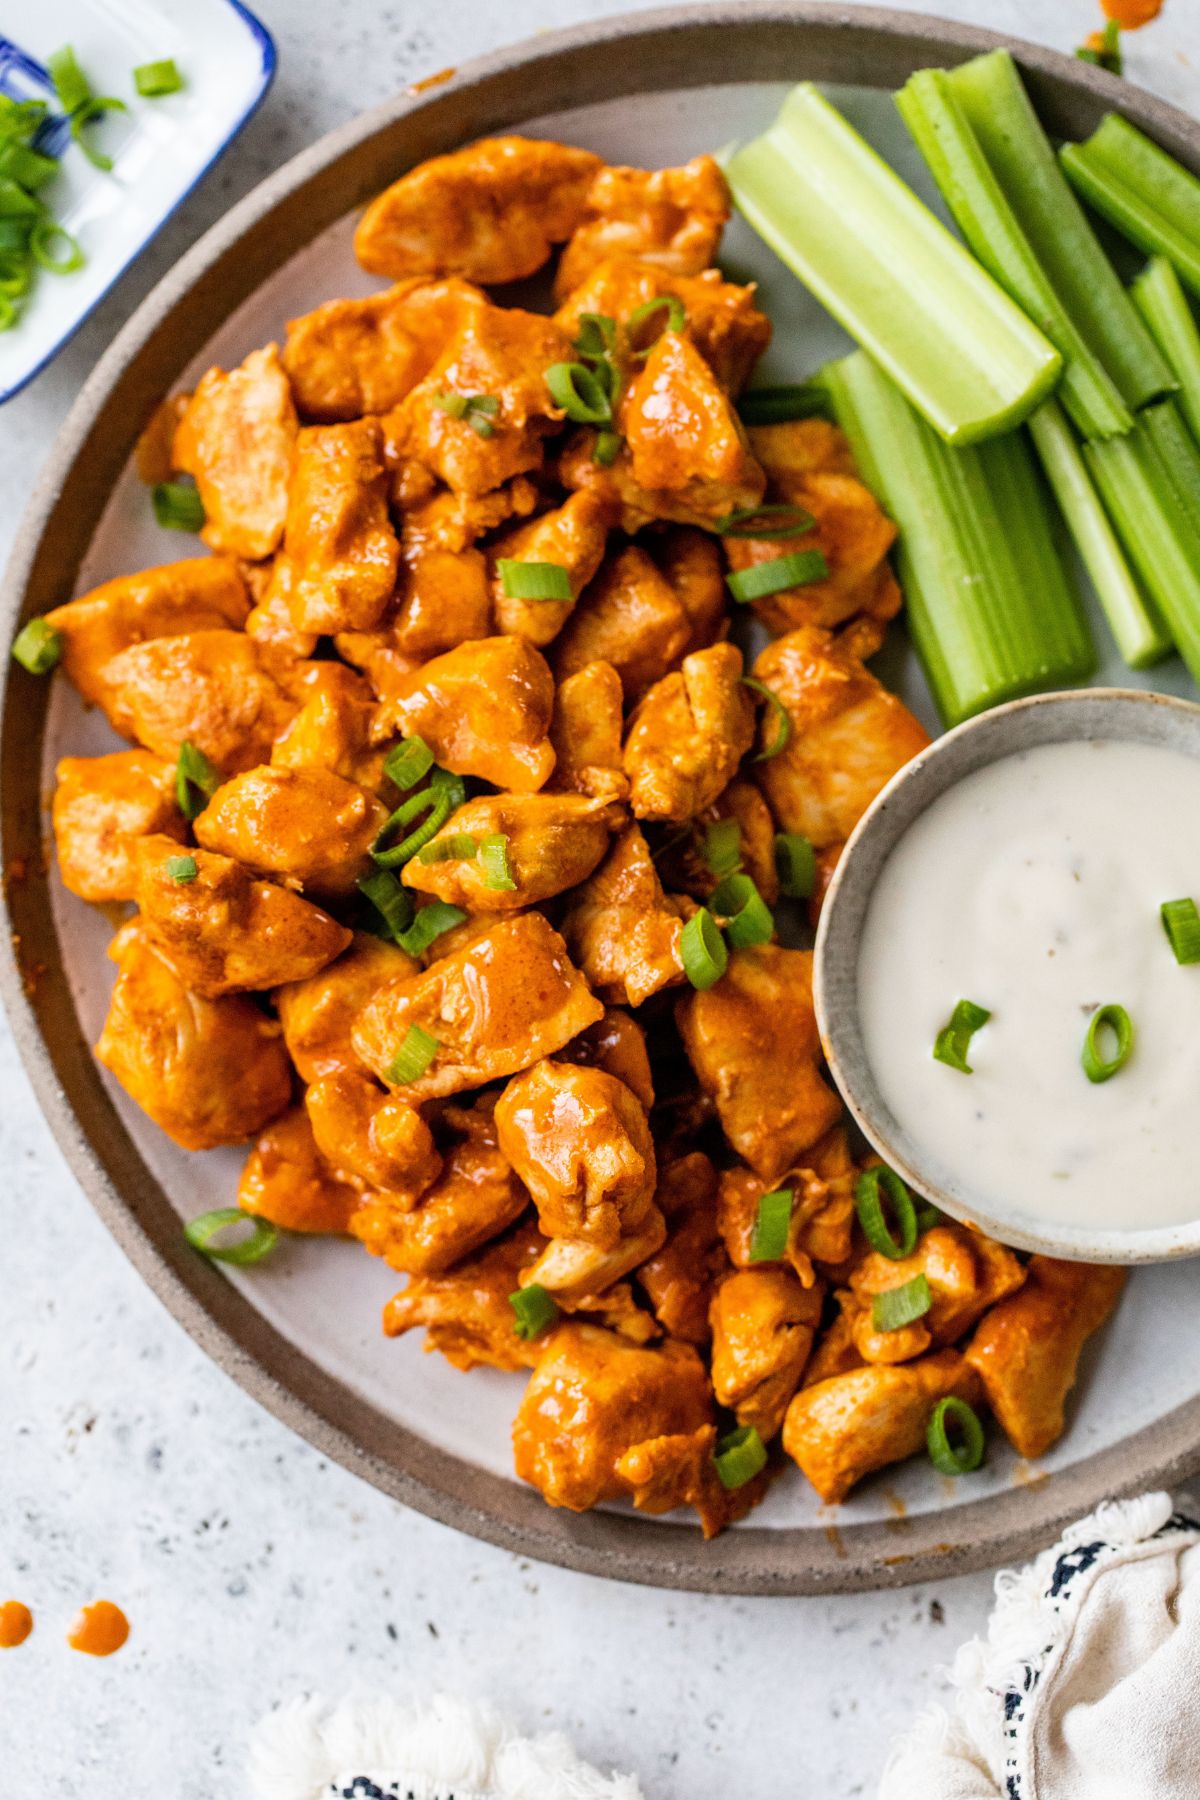 Buffalo chicken bites on a plate with celery sticks and dressing.